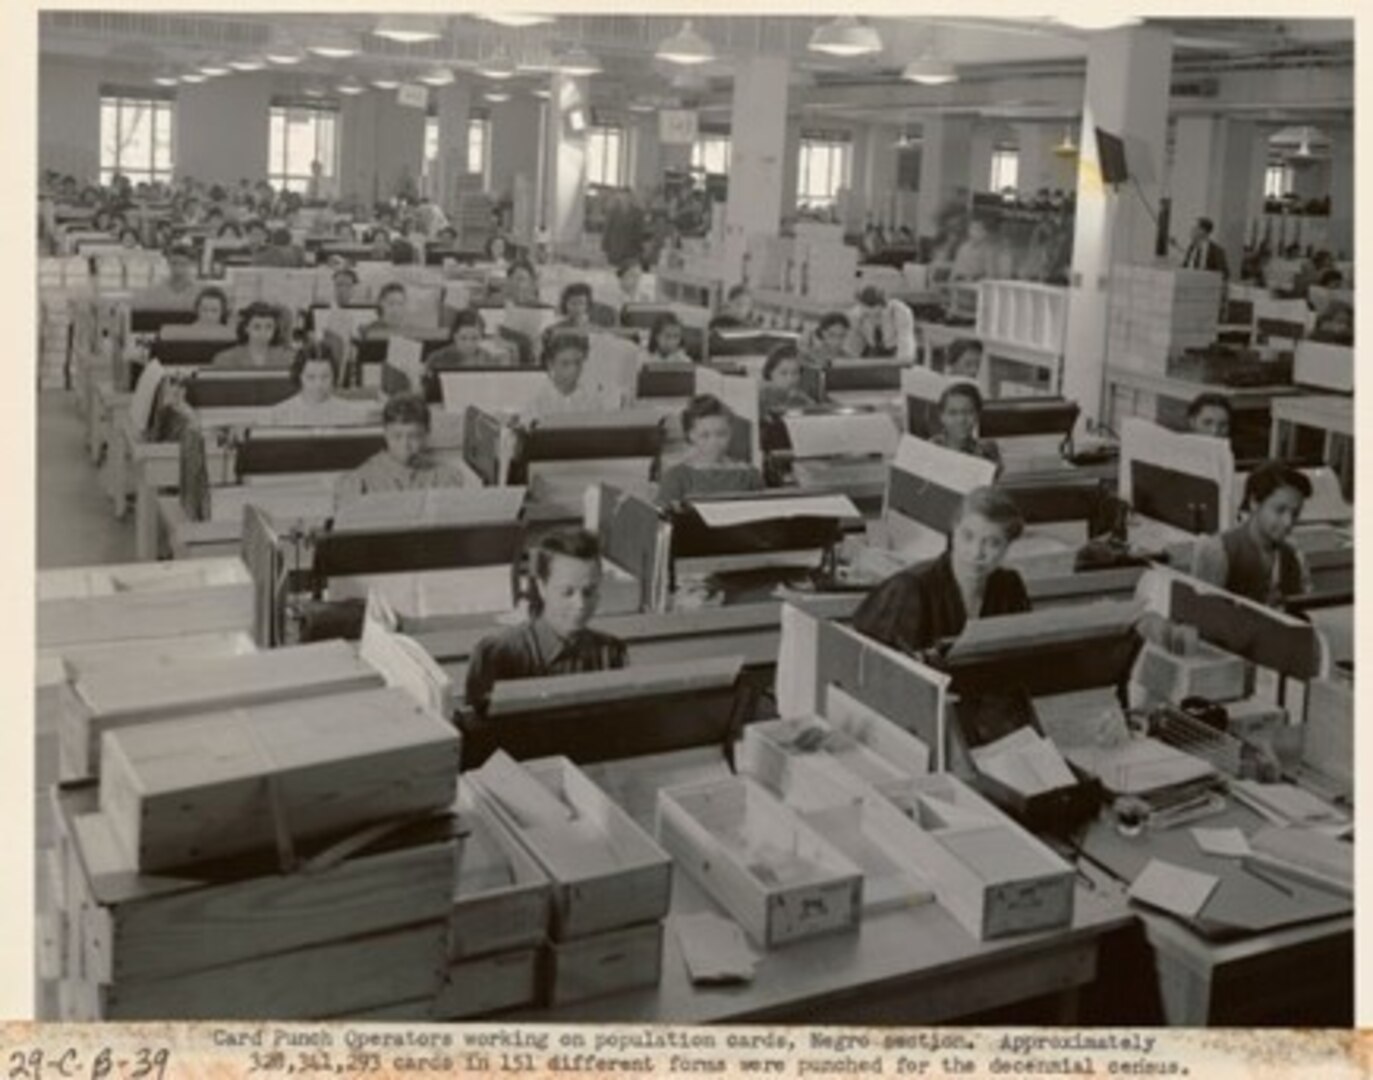 The Black employee section of a government office of civil service employees working on the decennial census. (National Archives (7741404))